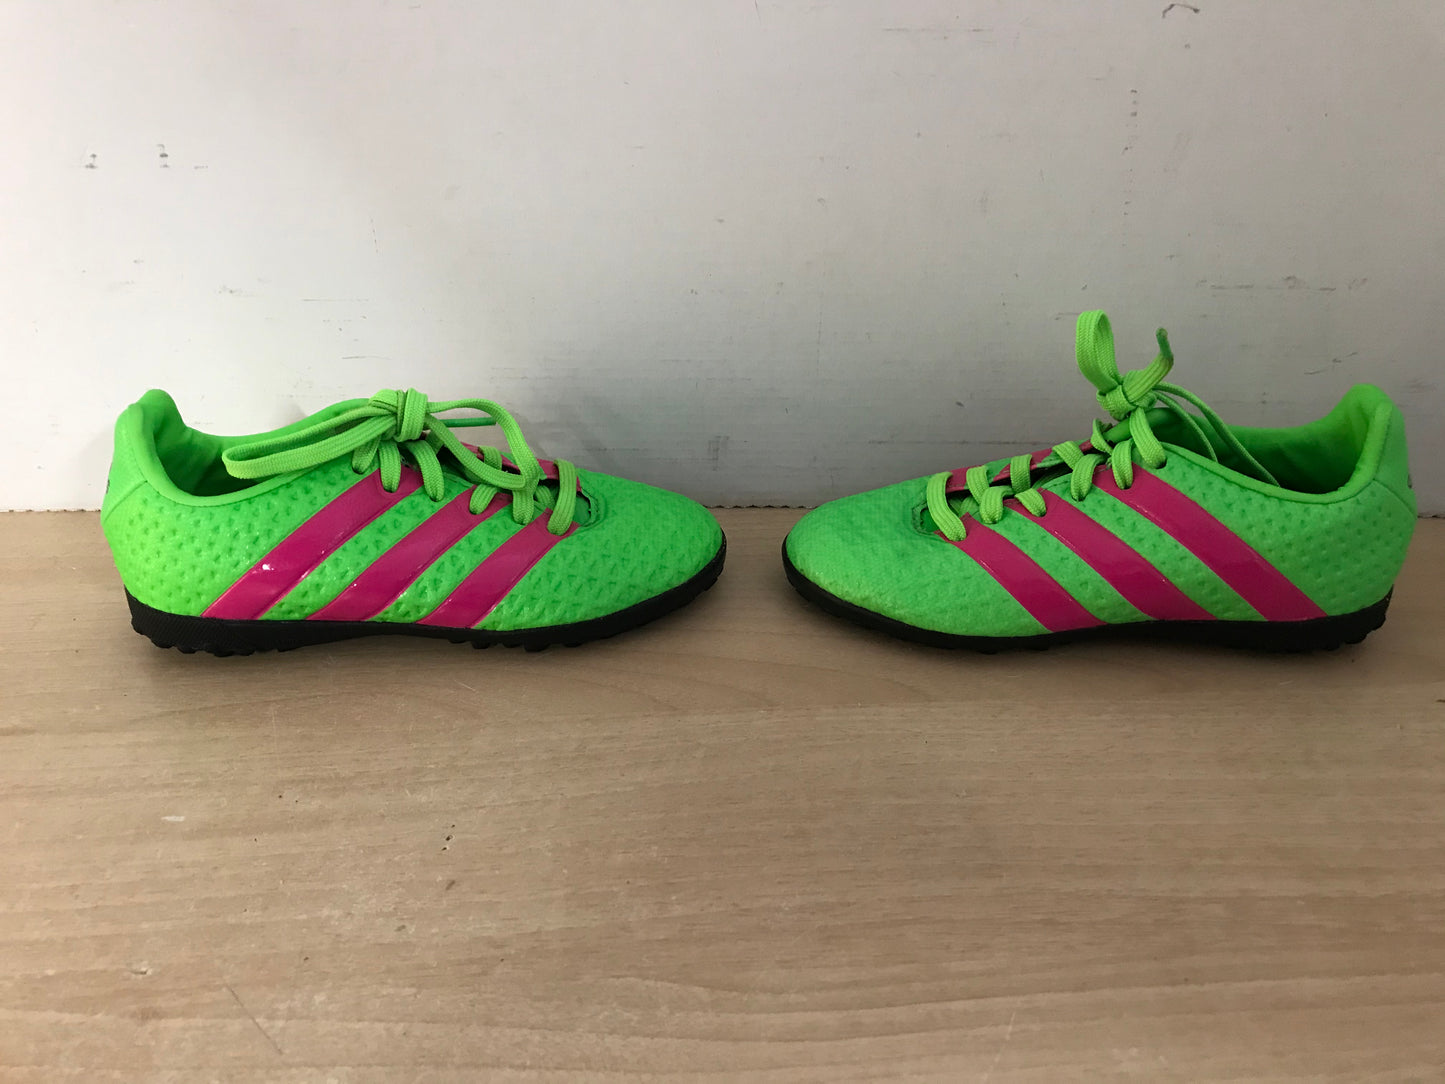 Soccer Shoes Cleats Indoor Child Size 10.5 Adidas Lime Pink As New Excellent